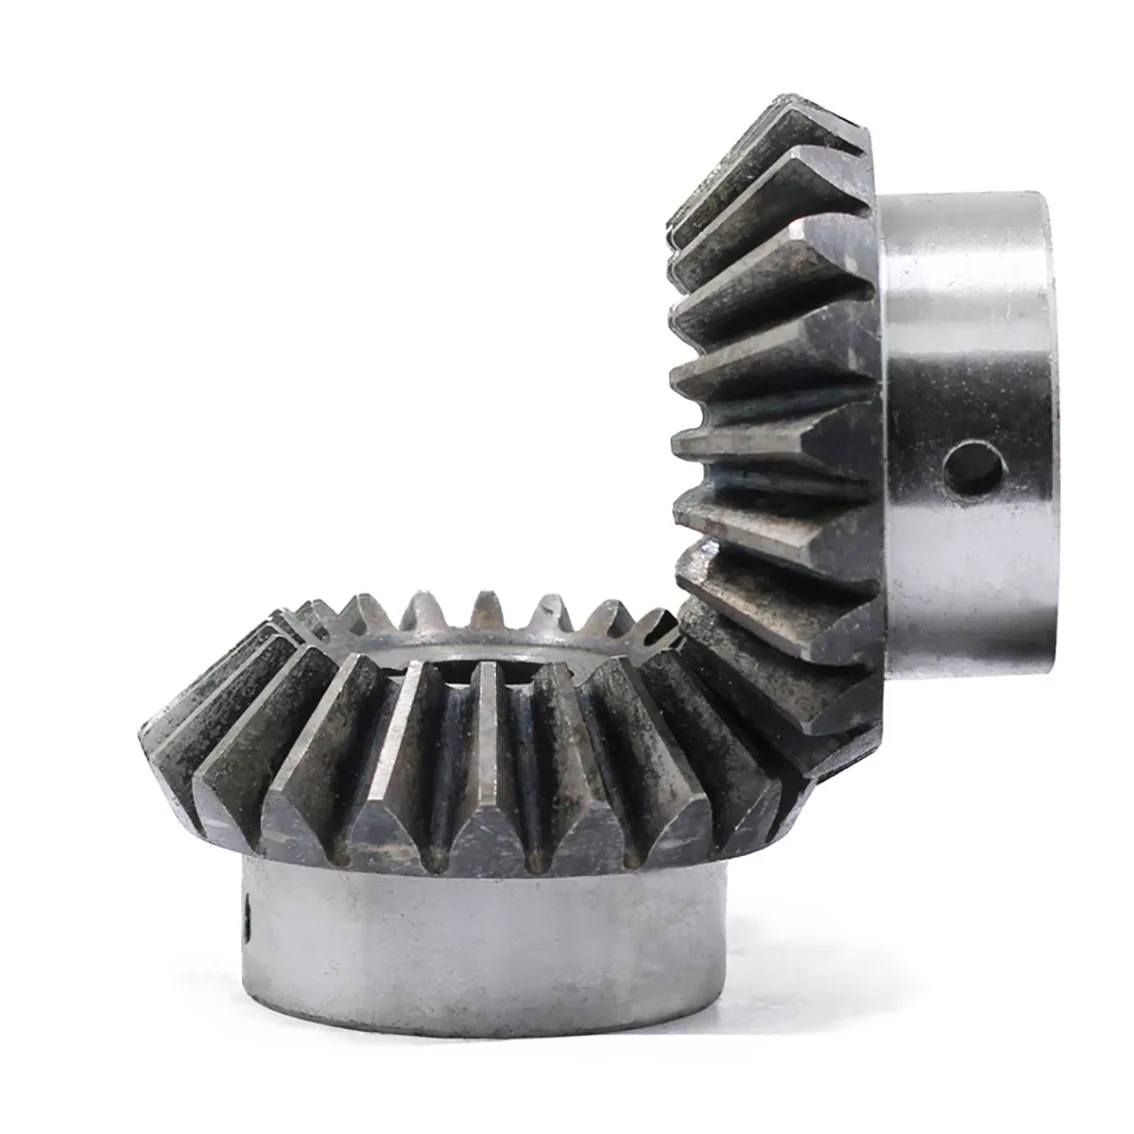 

1Pcs 30 Tooth 2.5 Module Bevel Gear With Keyway 1:1 90 Degrees 45# Steel Mechanical Power Transmission Gear